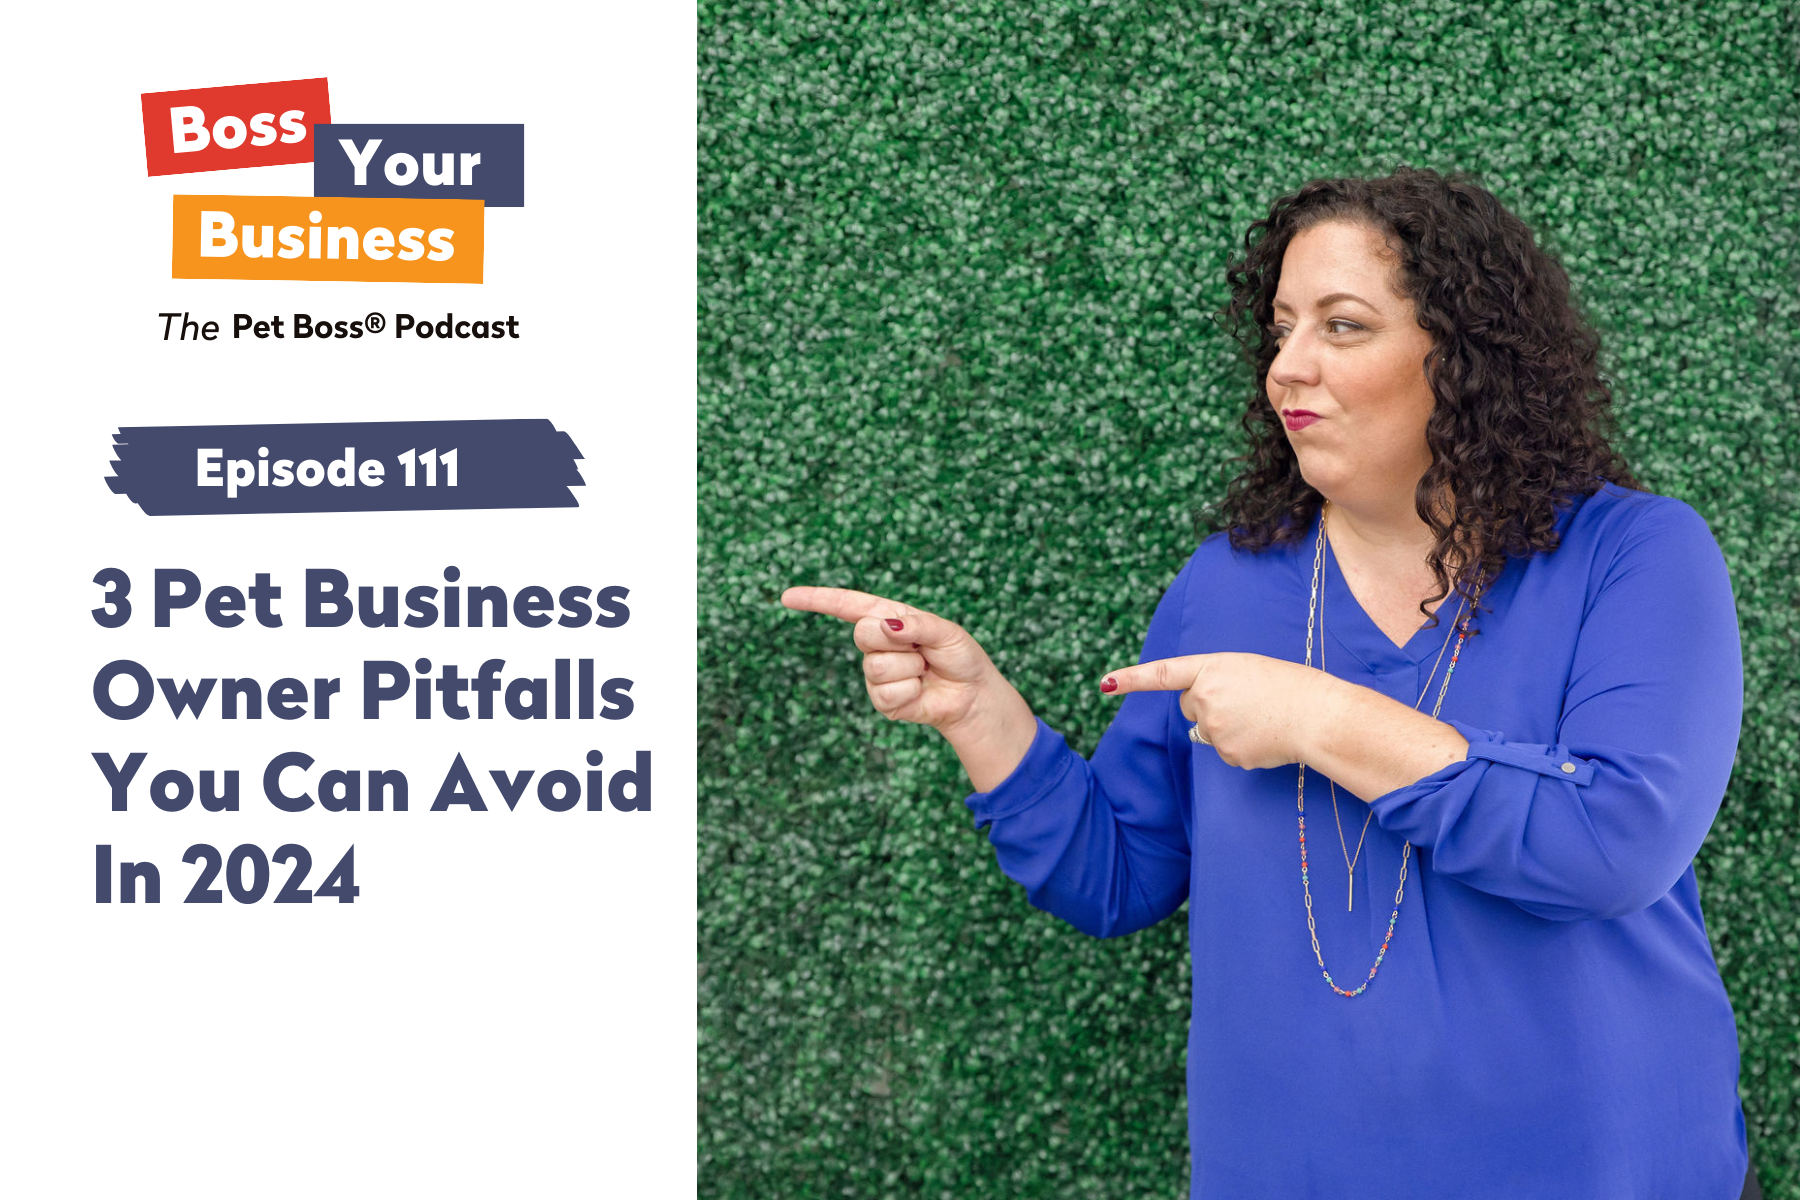 Episode 111 | 3 Pet Business Owner Pitfalls You Can Avoid In 2024